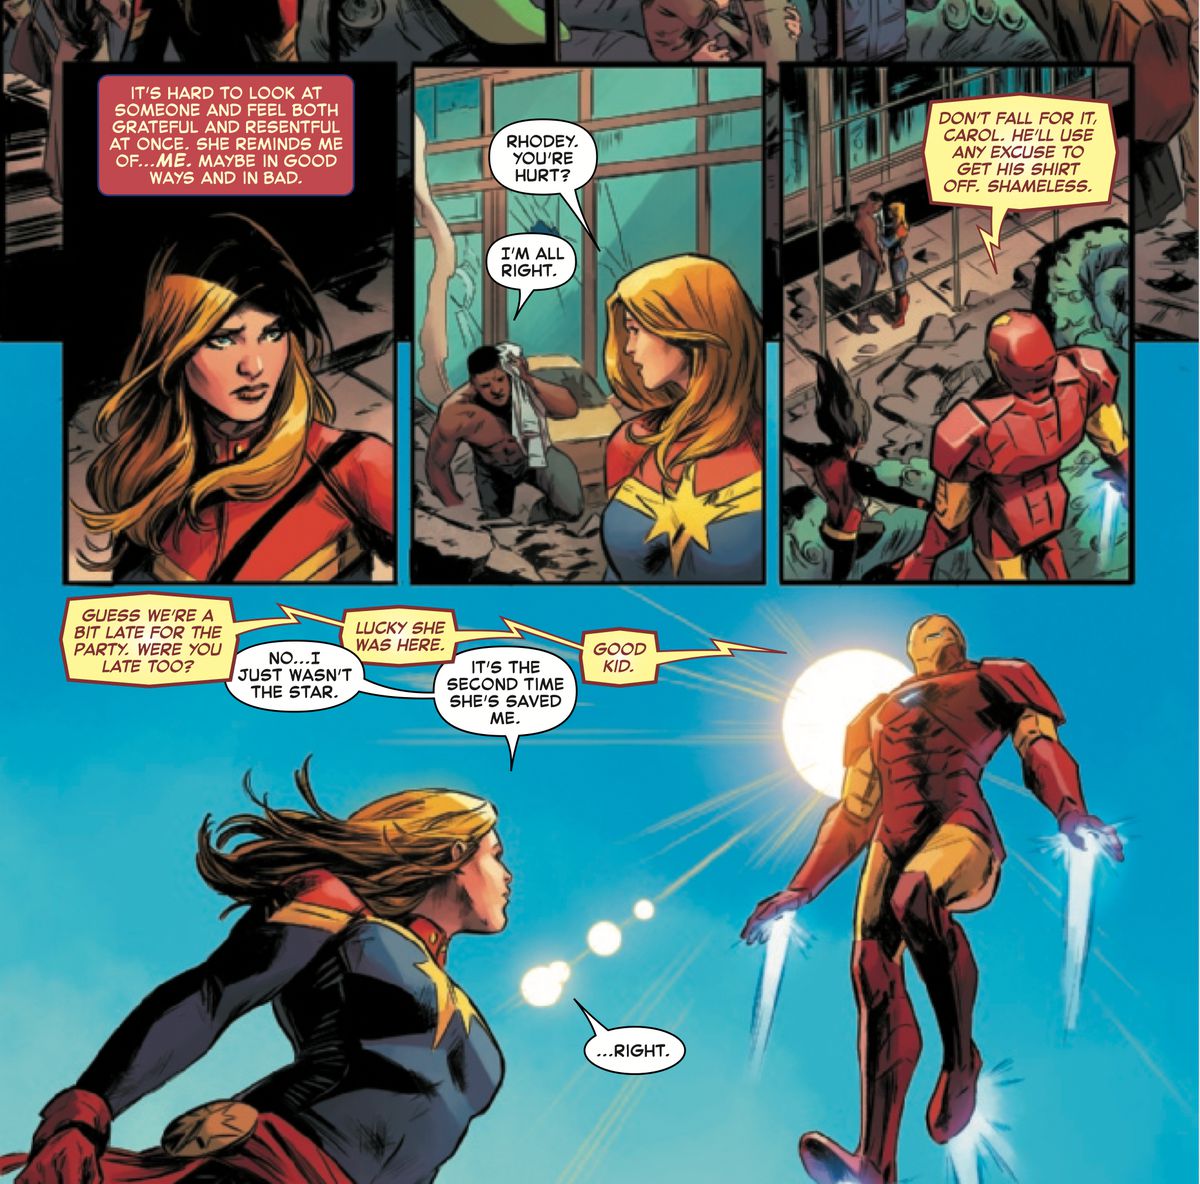 Carol Danvers/Captain Marvel, Rhodey Rhodes/War Machine, and Tony Stark/Iron Man recover from battle with a giant monster, and discuss the mysterious new superheroine on the scene in Captain Marvel #9, Marvel Comics (2019). 